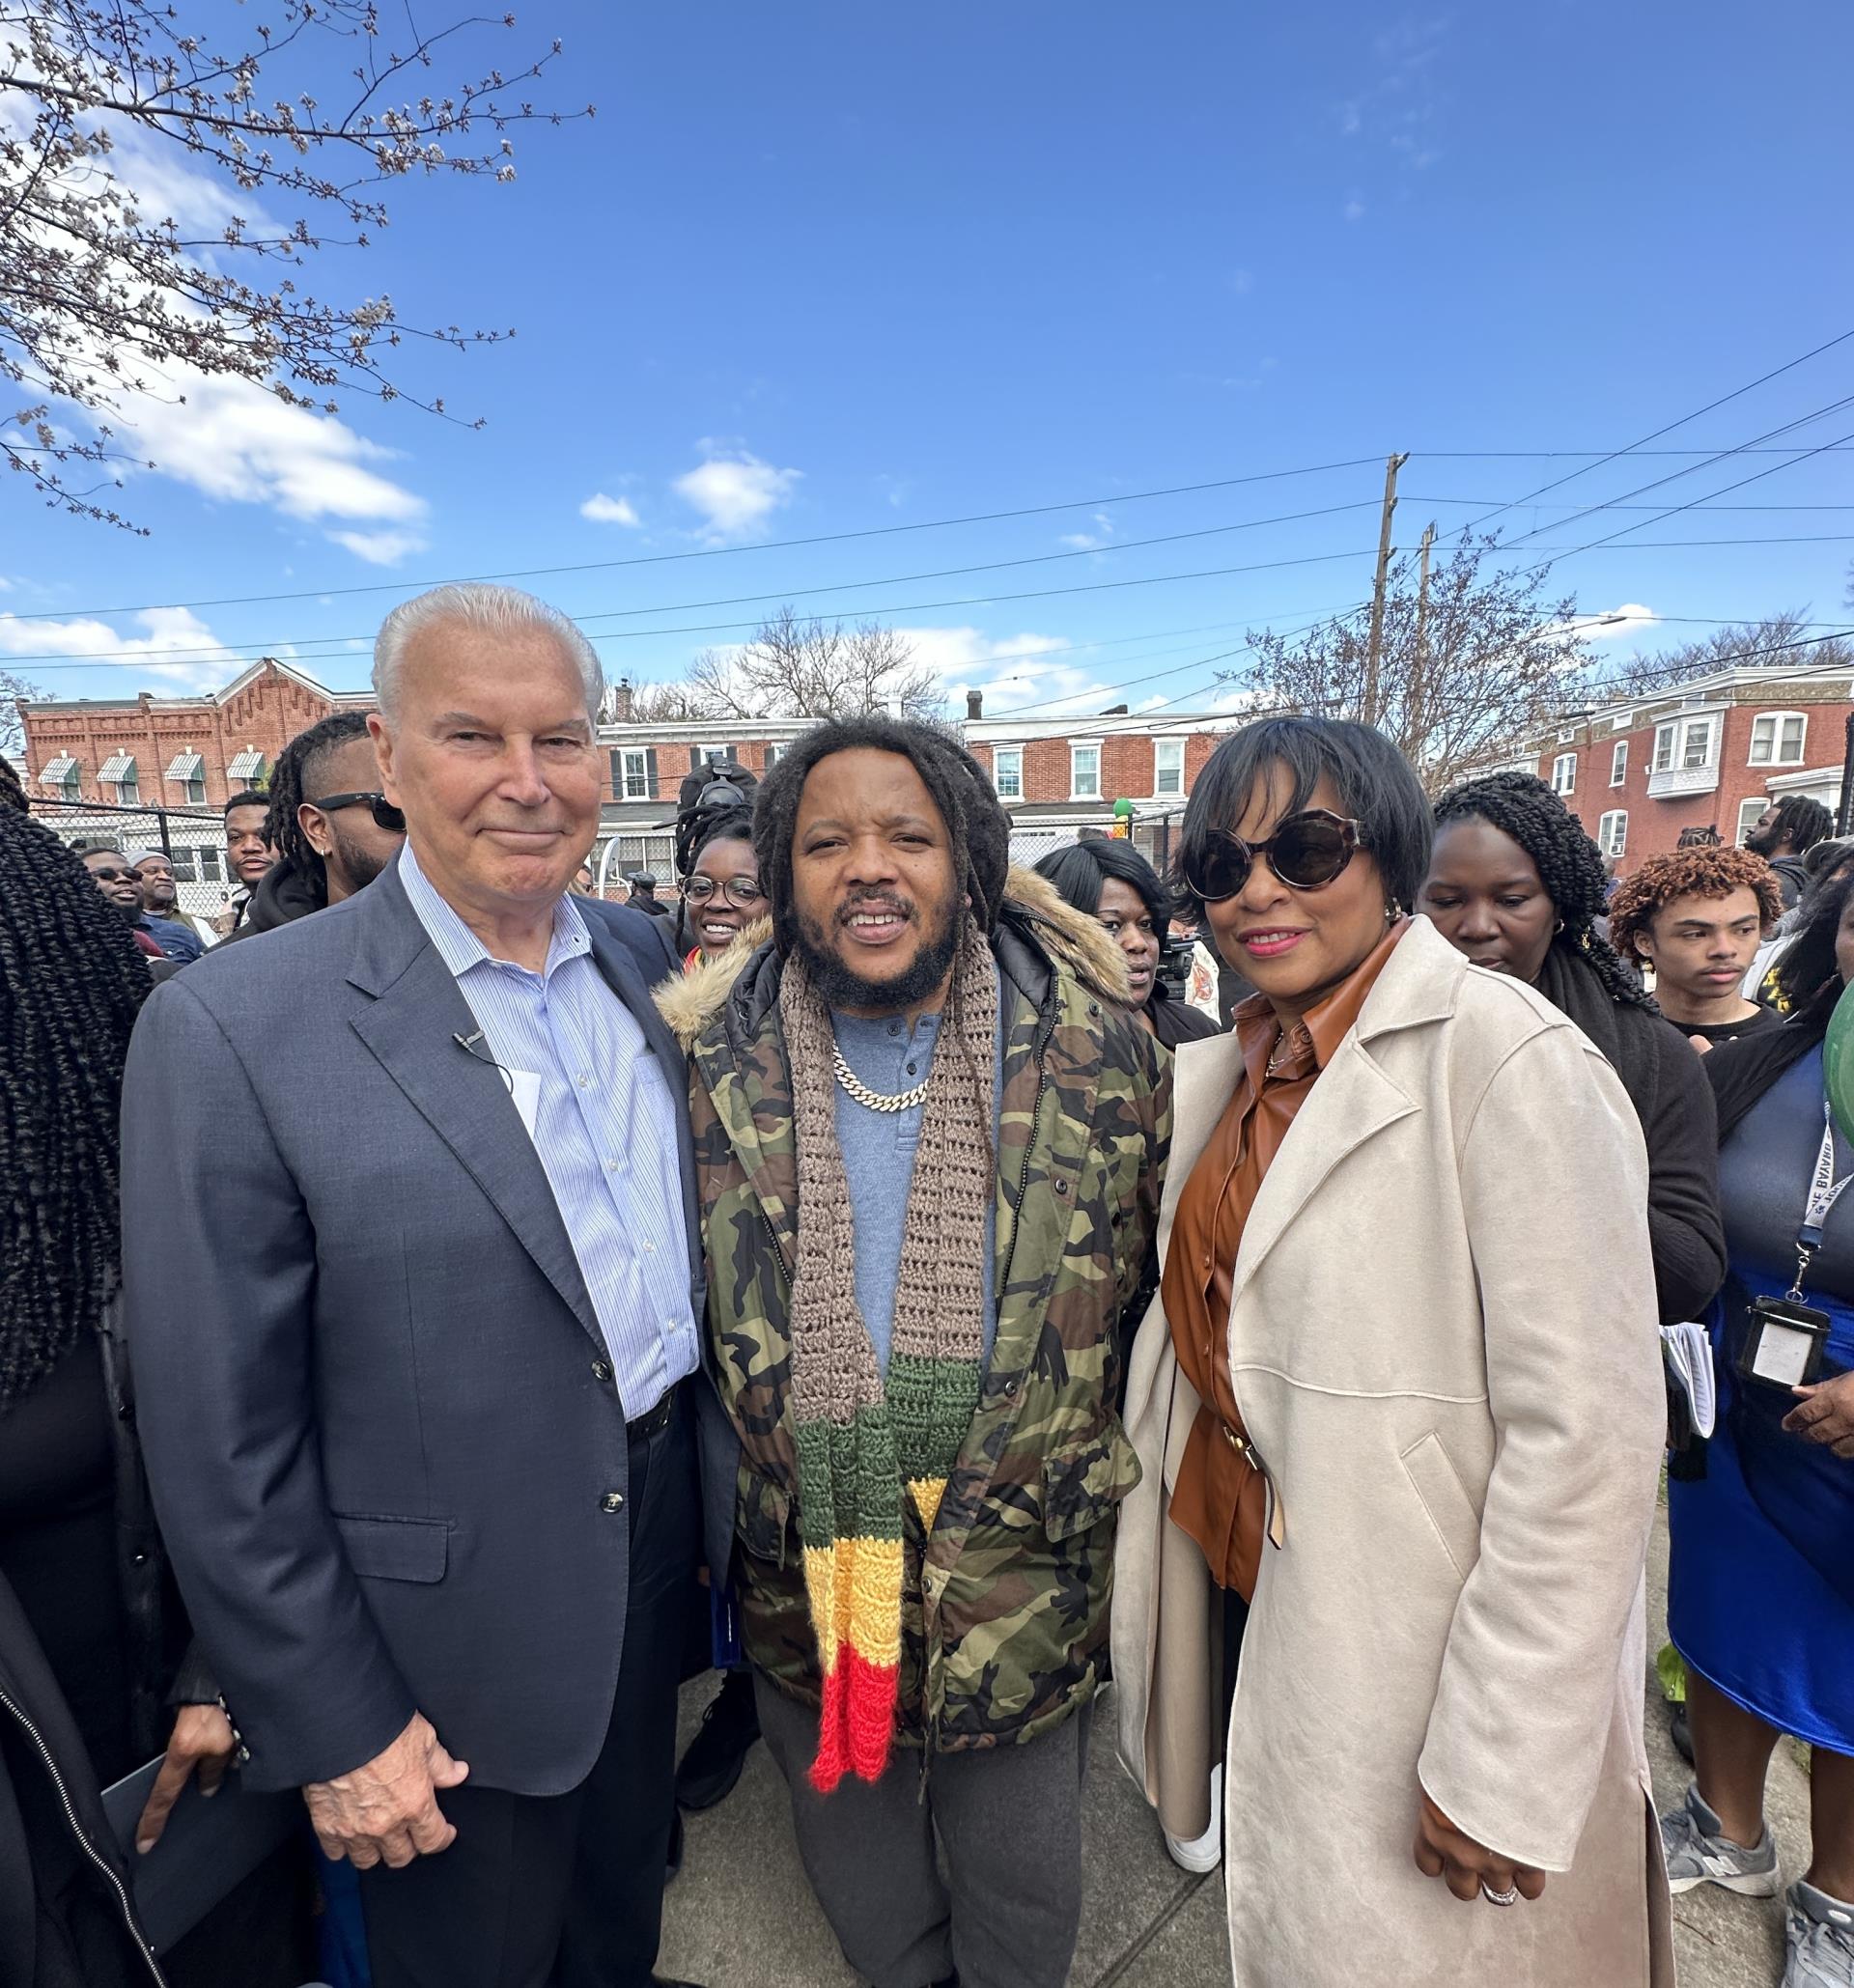  Stephen Marley honored with Key to the City Of Wilmington, Delaware 